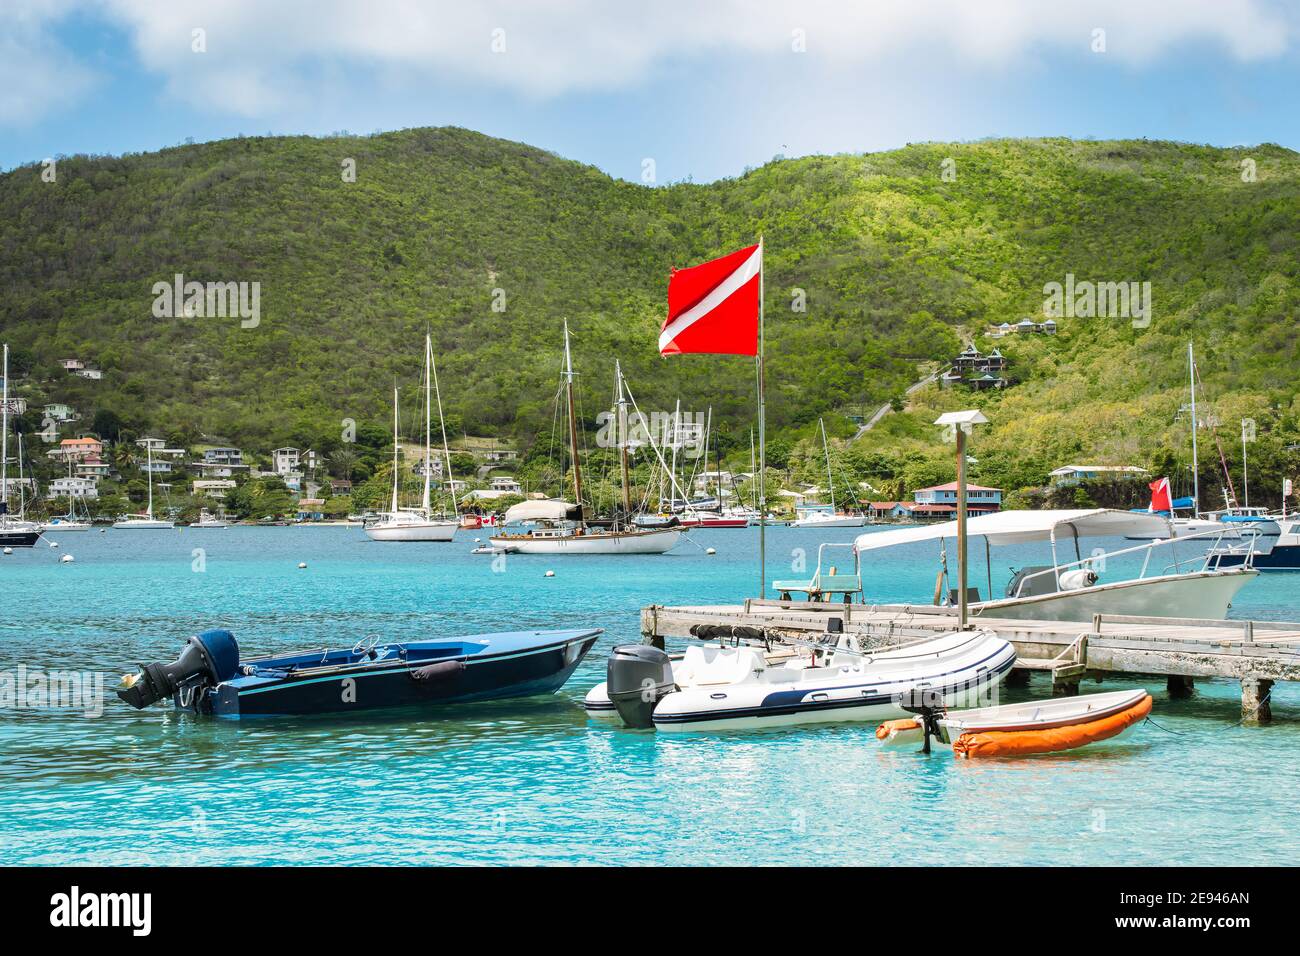 Boats in the harbor of Bequia, St Vincent and the Grenadines. Stock Photo